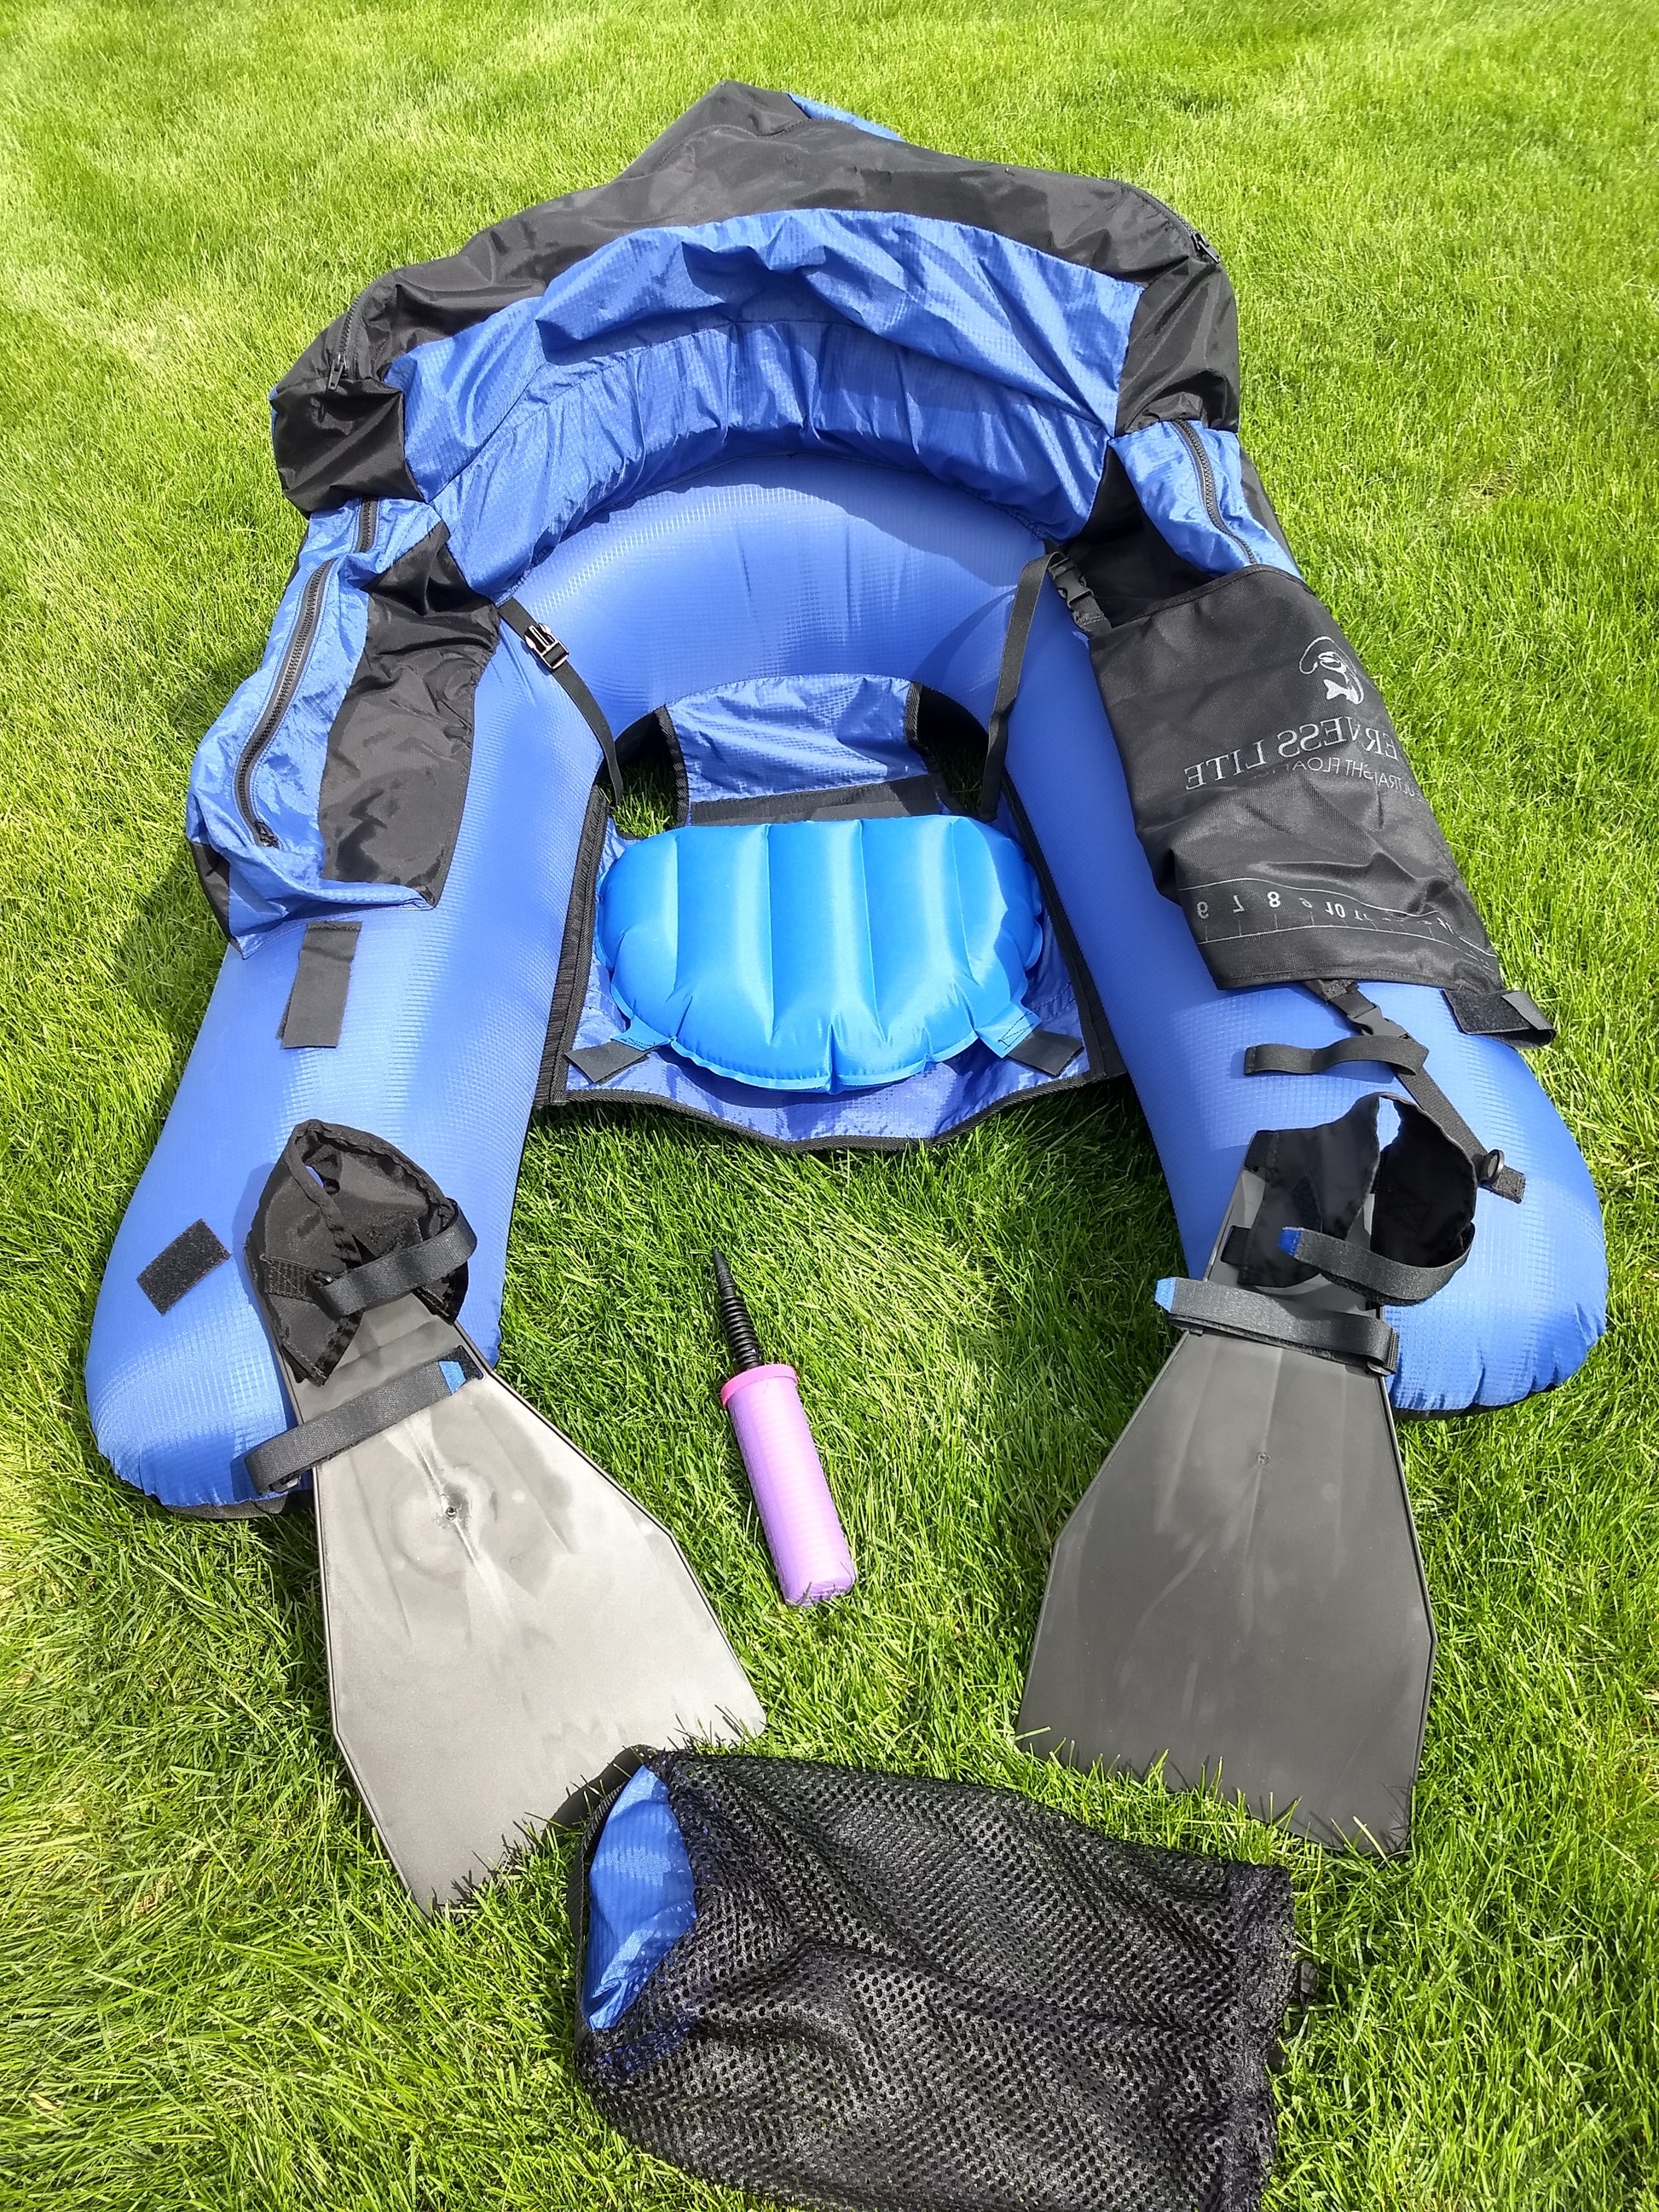 Picture of the Backpacker Pro complete ultralight float tube outfit with all its accessories and many features.  It includes Opti-Pack ultralight fins, Ice-Out inflatable seat, pump, & stuff sack sold at a discount.  This durable made in USA ultralight float tube comes with 3 inflation bladders, 3 zippered storage pockets, rod clamps, net clamp, 5 D rings, and a mesh apron for landing & measuring fish.